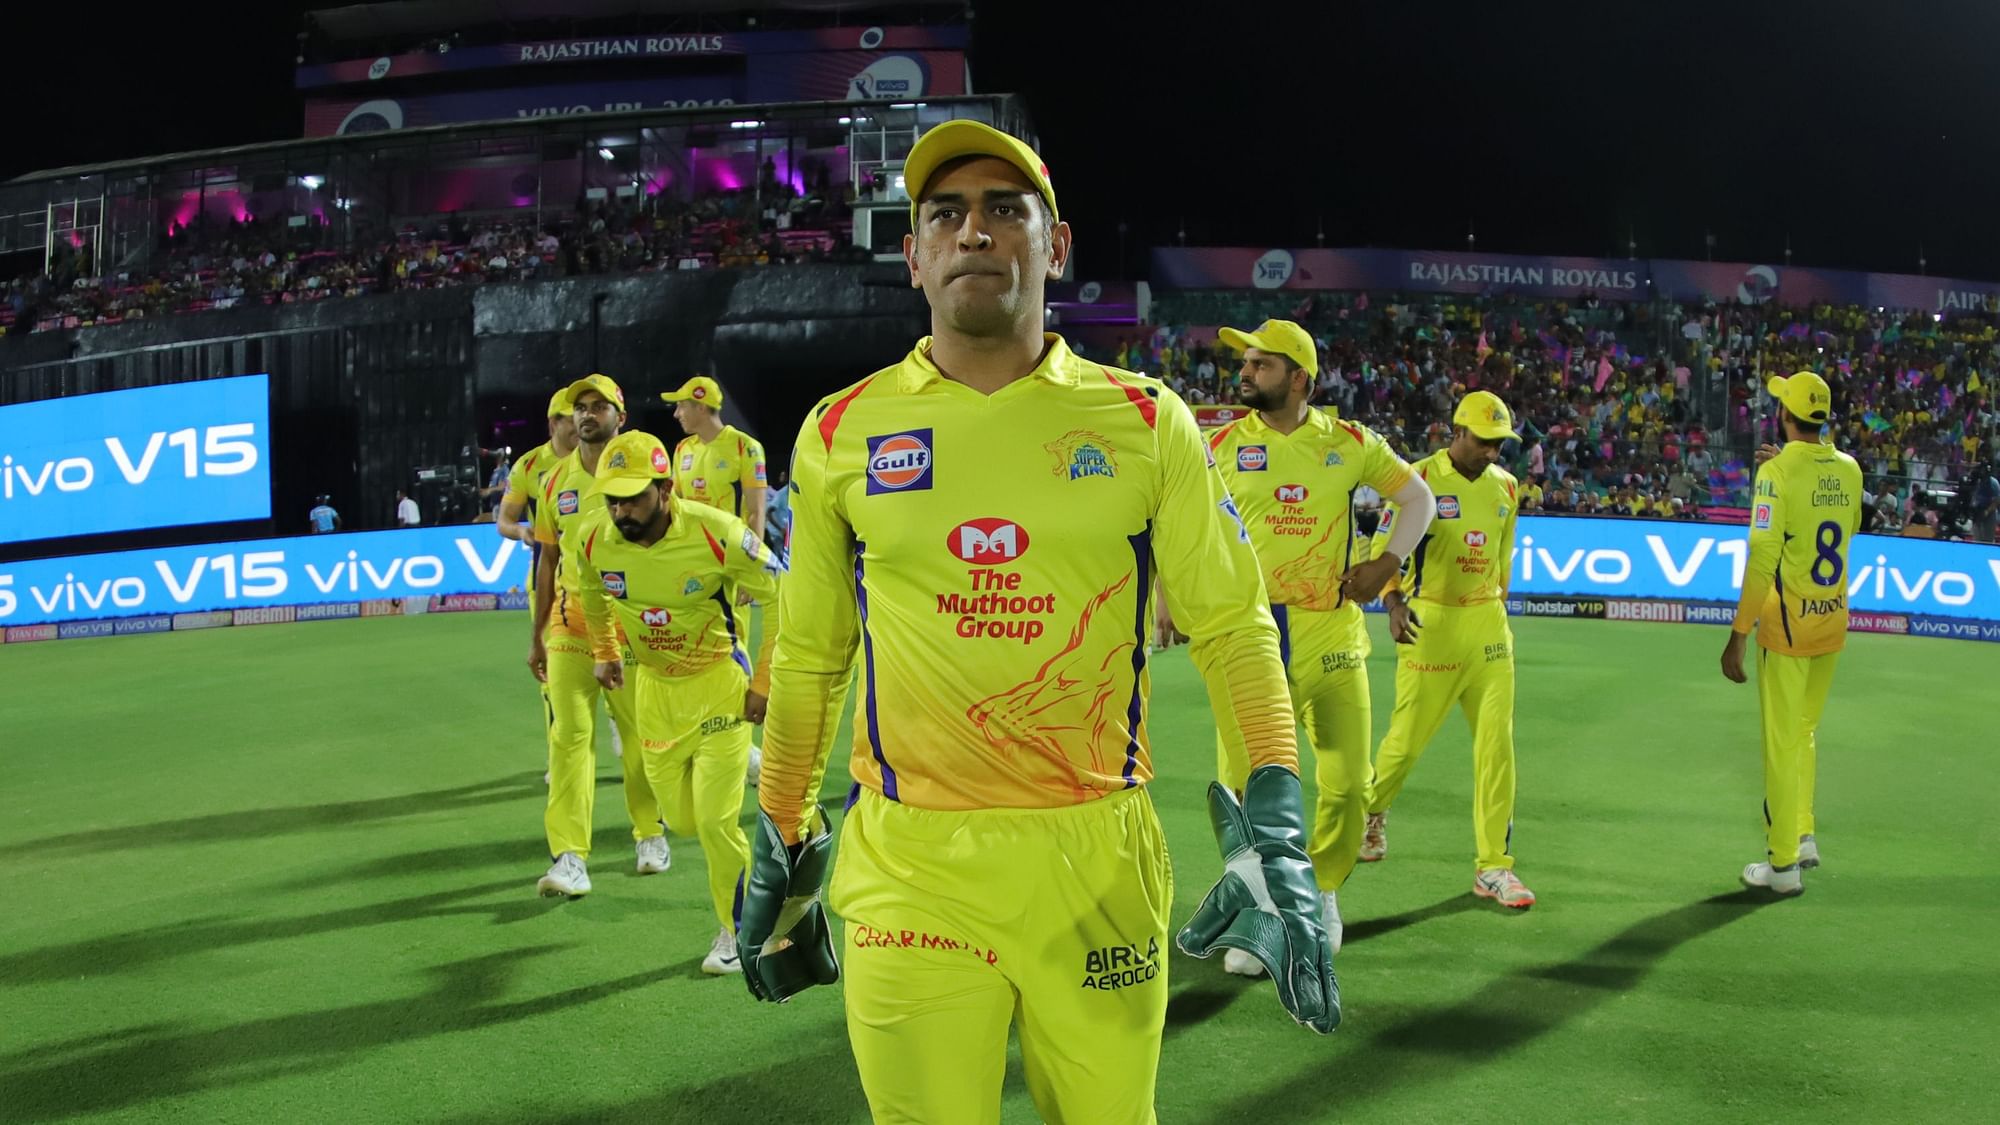 Chennai Super Kings (CSK) are playing Mumbai Indians in the IPL 2020 opener on Saturday evening.